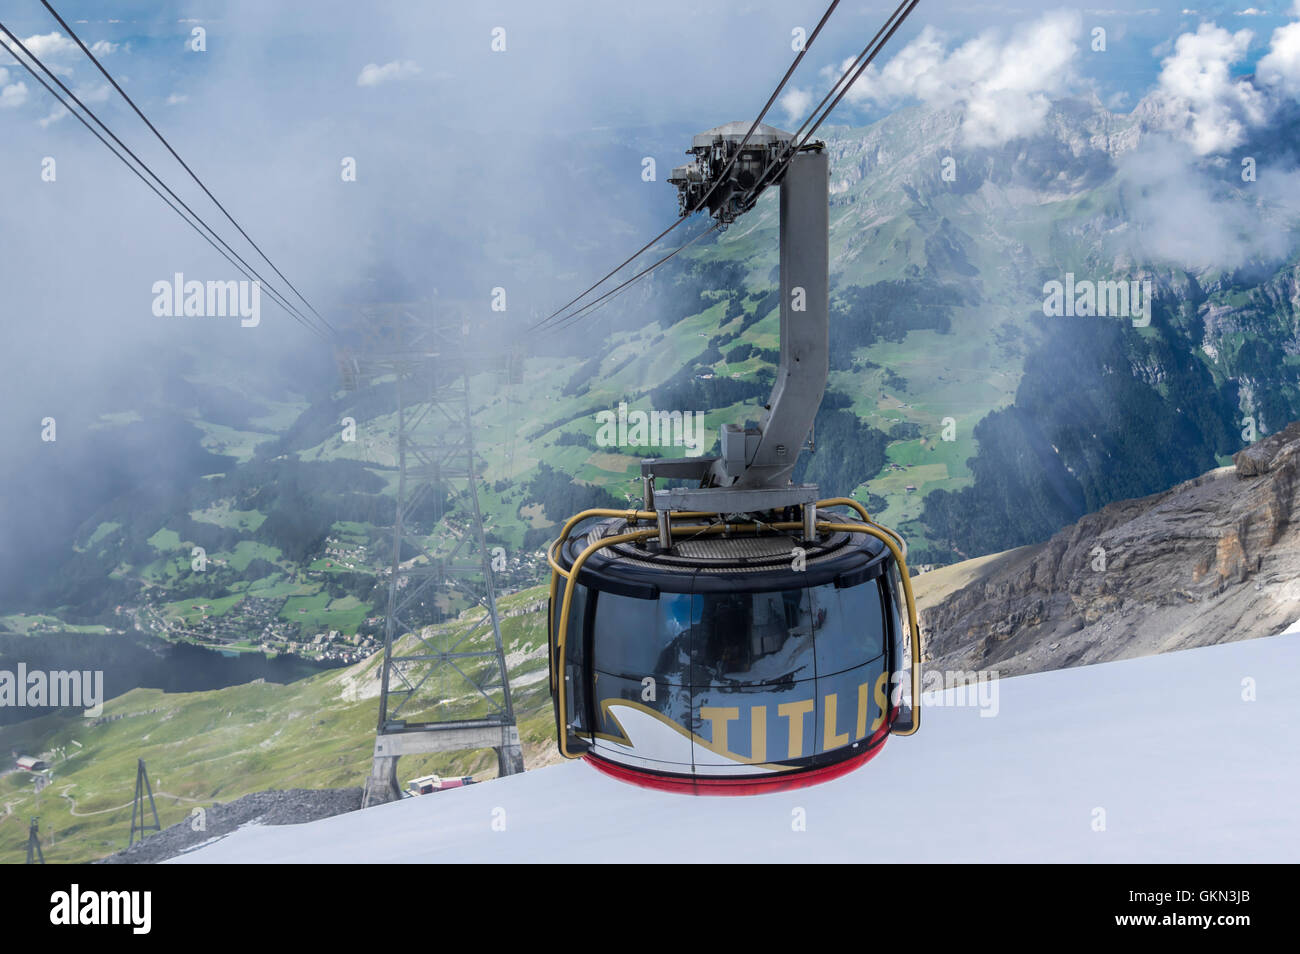 Revolving cable car 'Titlis Rotair' approaching the top station on Klein Titlis. Engelberg, Obwalden, Switzerland. Stock Photo